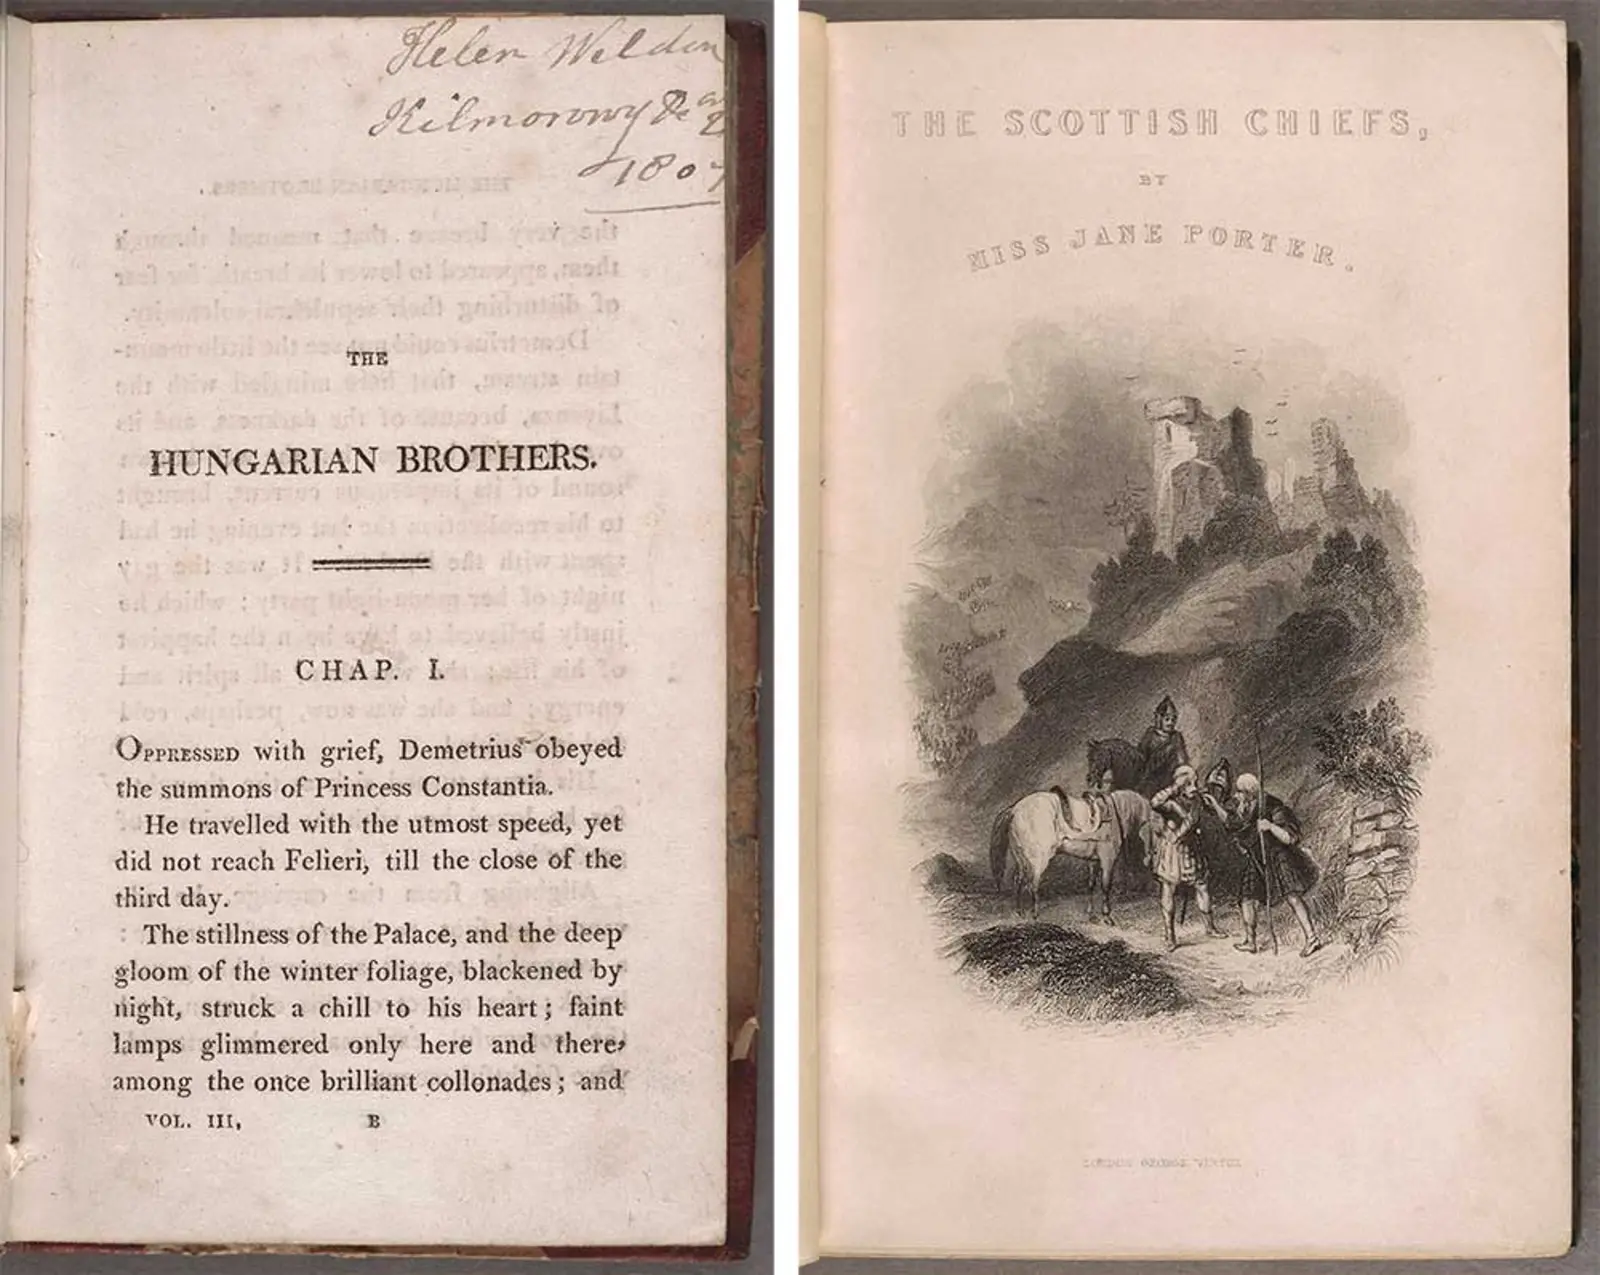 Left: Anna Maria Porter, The Hungarian Brothers, 1807. London: Printed by C. Stower for Longman, Hurst, Rees, and Orme. First page and volume of the first edition of the novel. Right: Jane Porter, The Scottish Chiefs: Revised, corrected, and illustrated with a new retrospective introduction. 